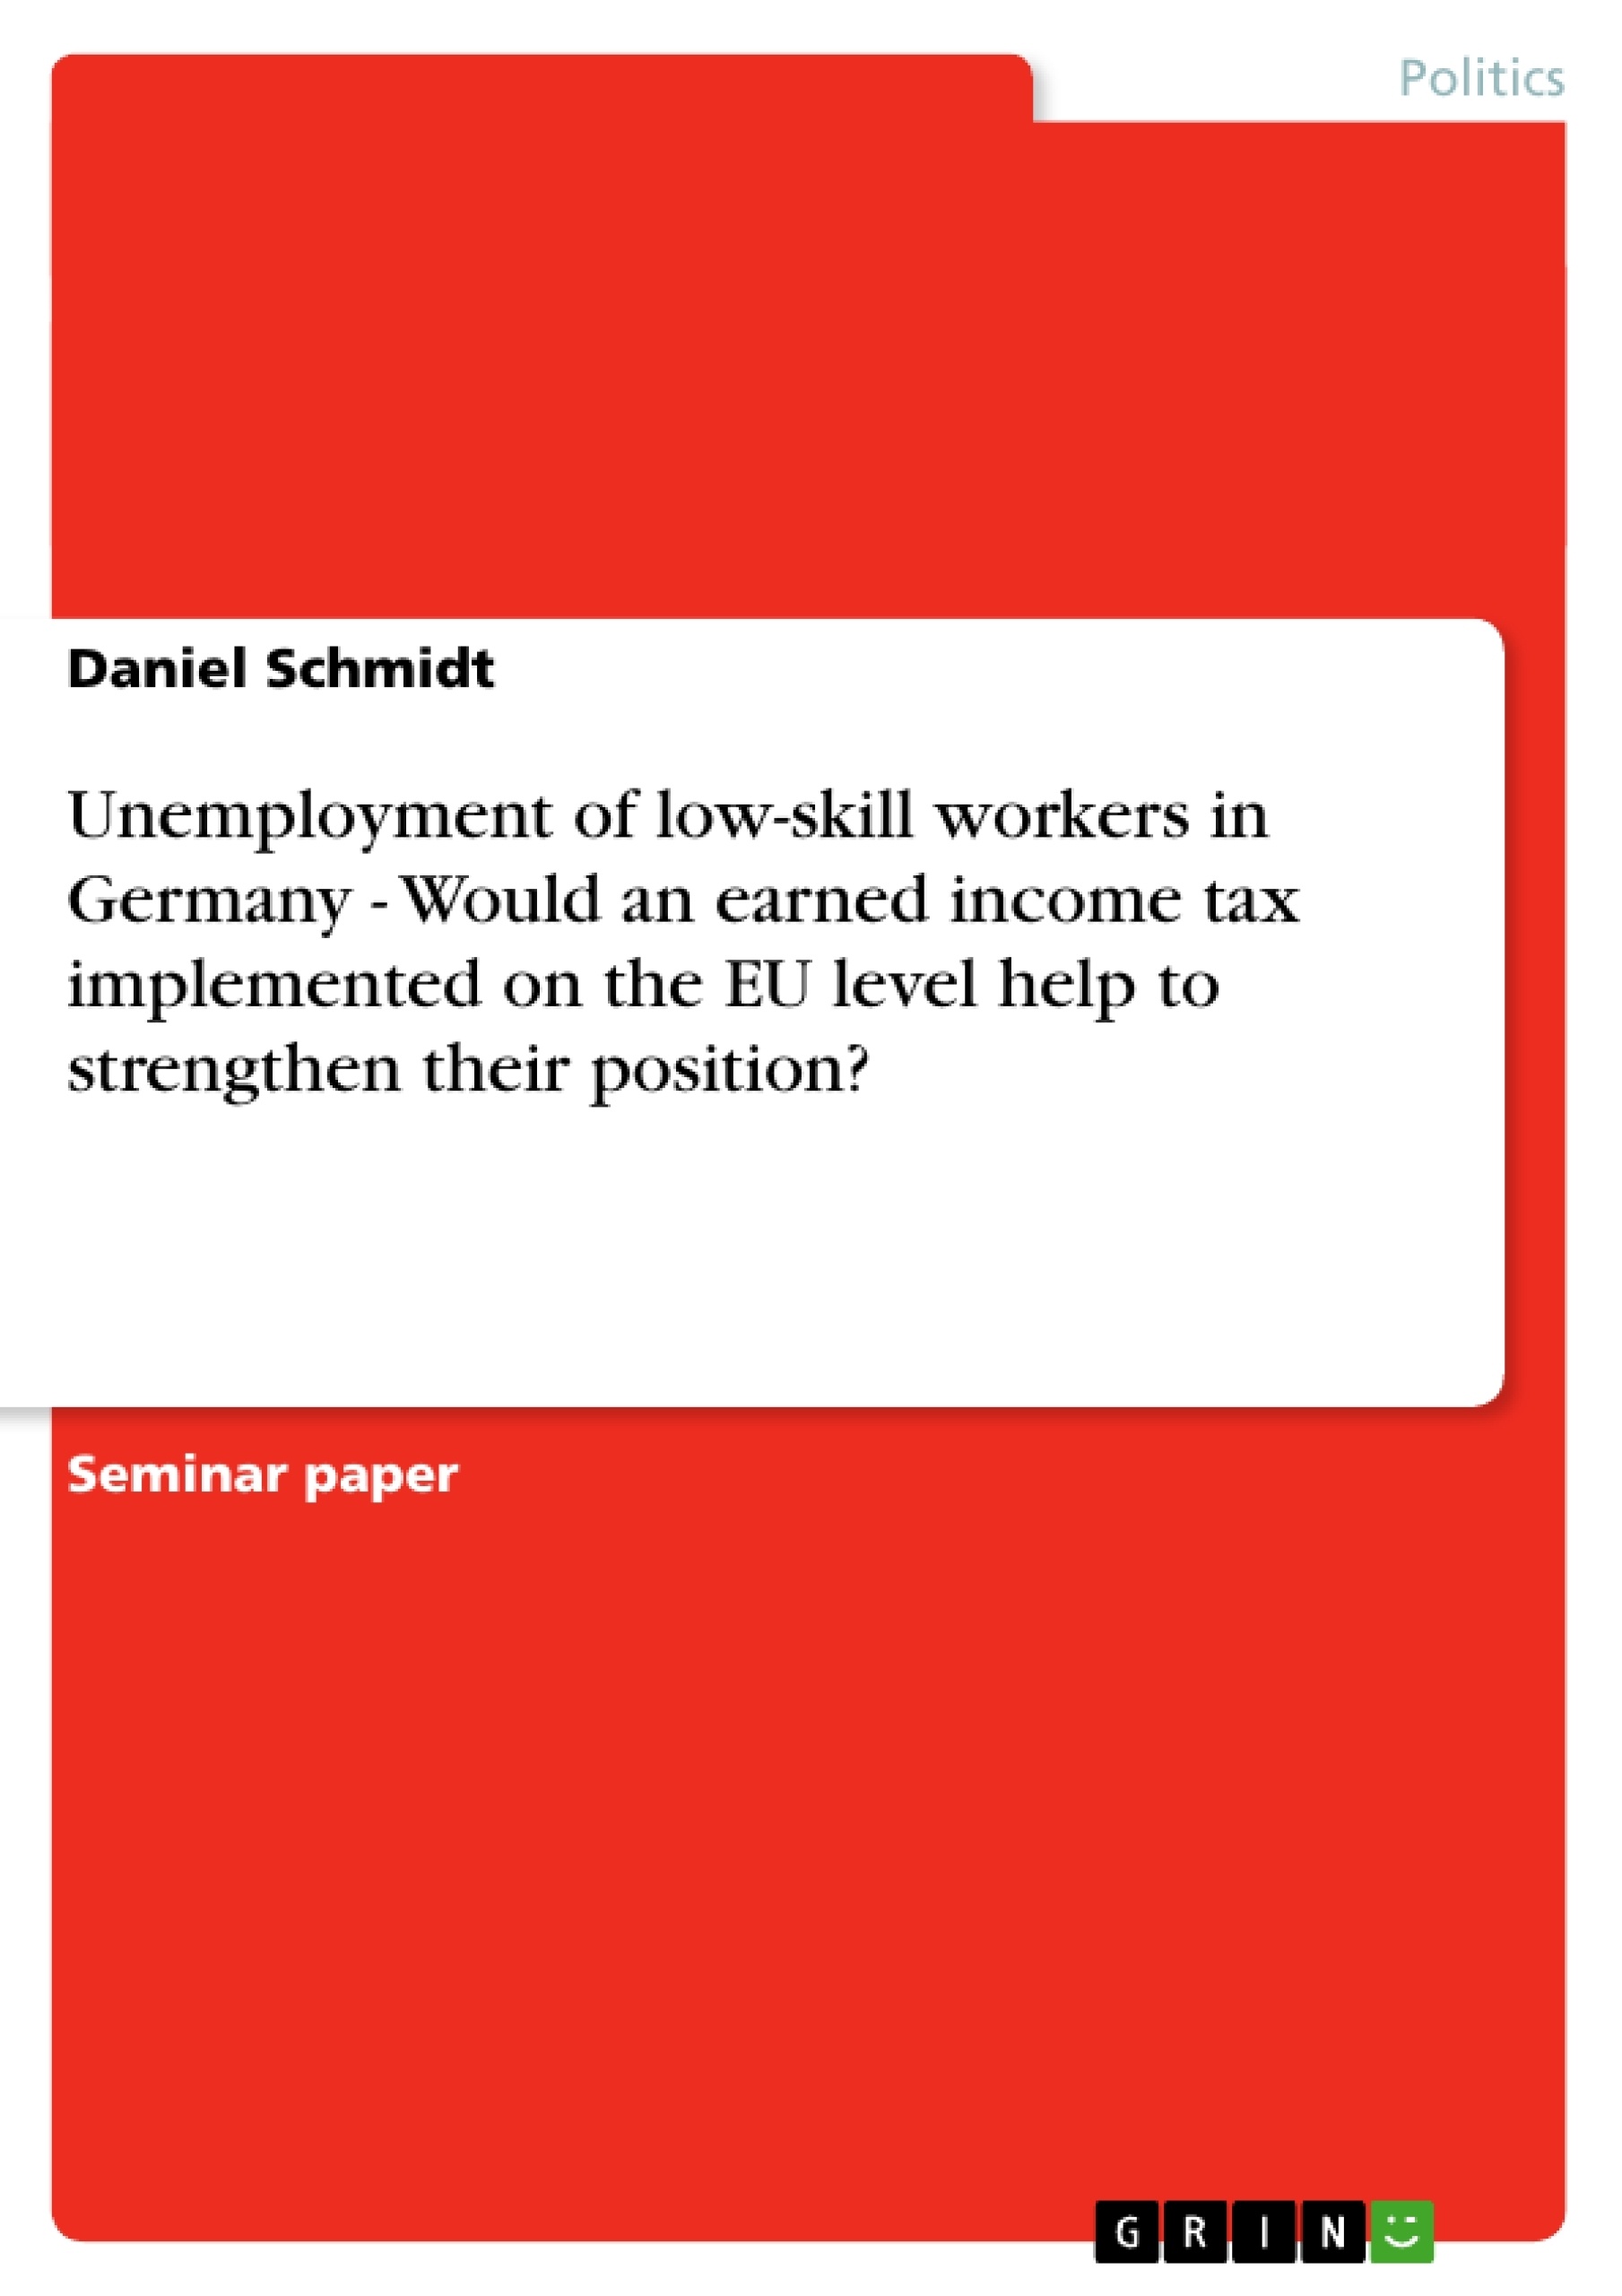 Title: Unemployment of low-skill workers in Germany - Would an earned income tax implemented on the EU level help to strengthen their position?